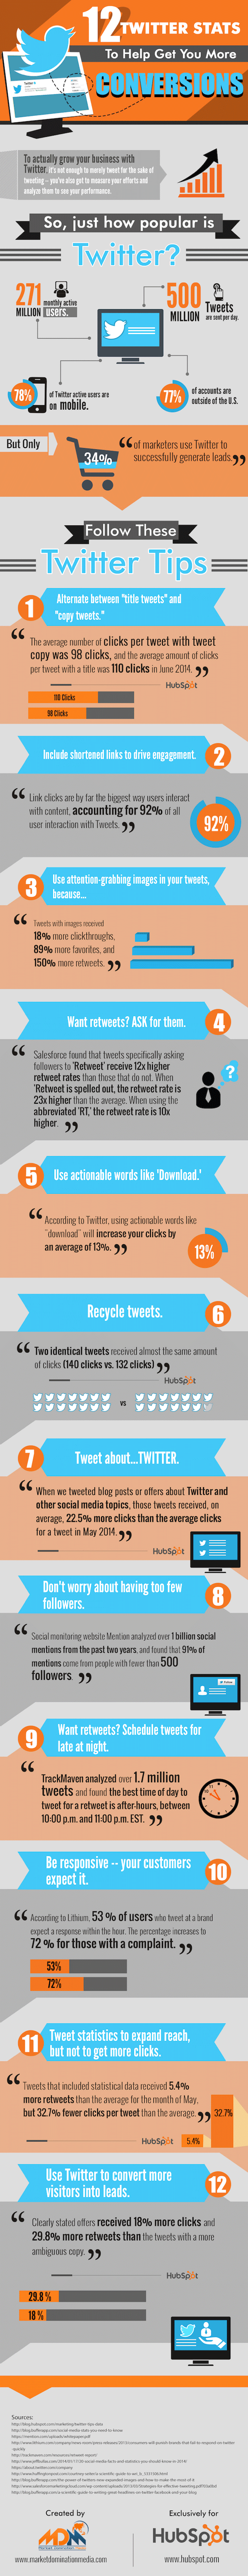 12 Tips to Increase Engagement on Twitter Infographic image